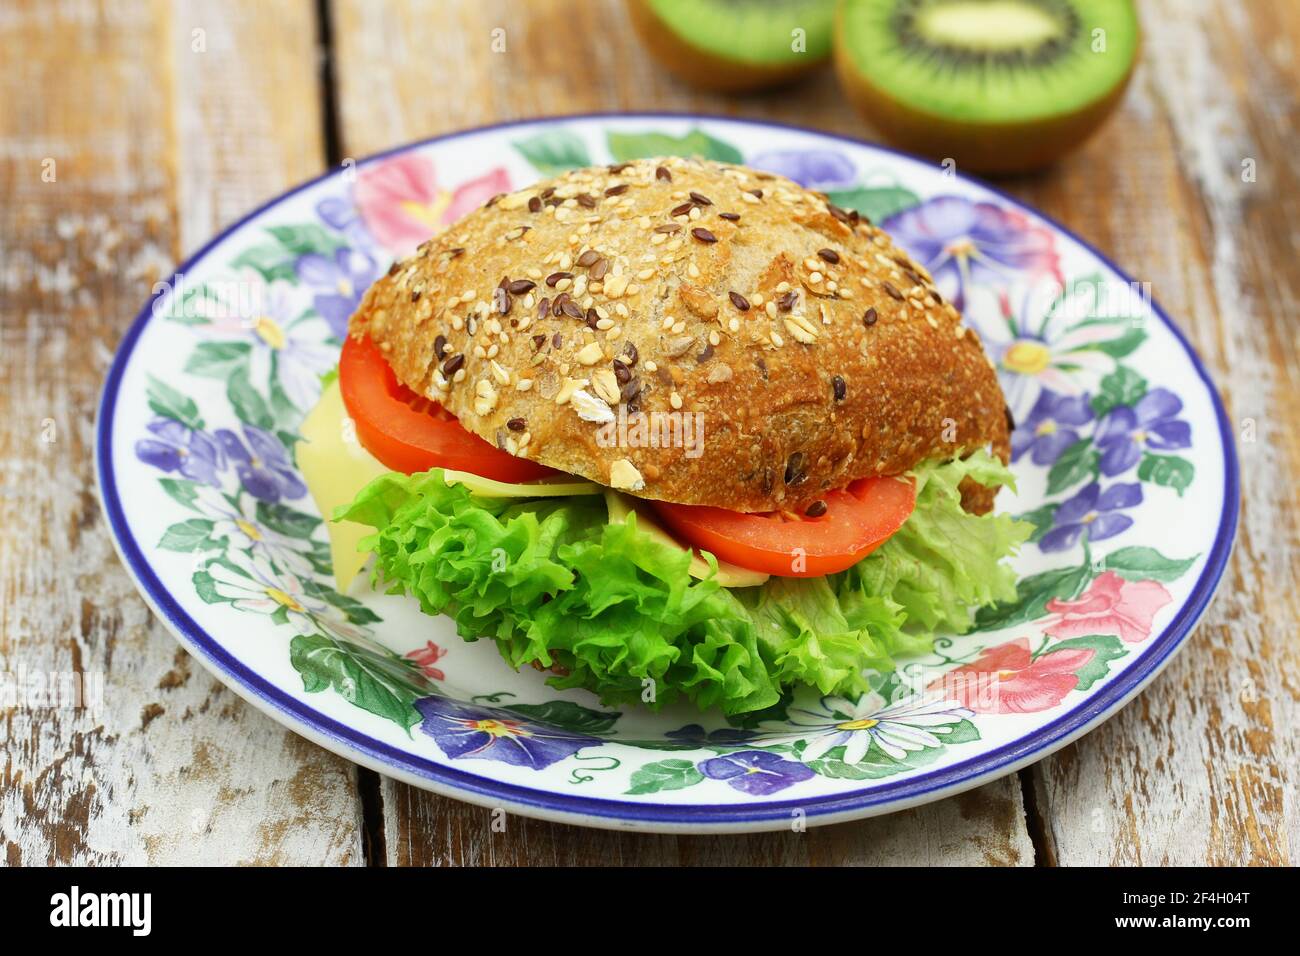 Mixed grain roll with cheese, lettuce and tomato on colorful vintage plate Stock Photo